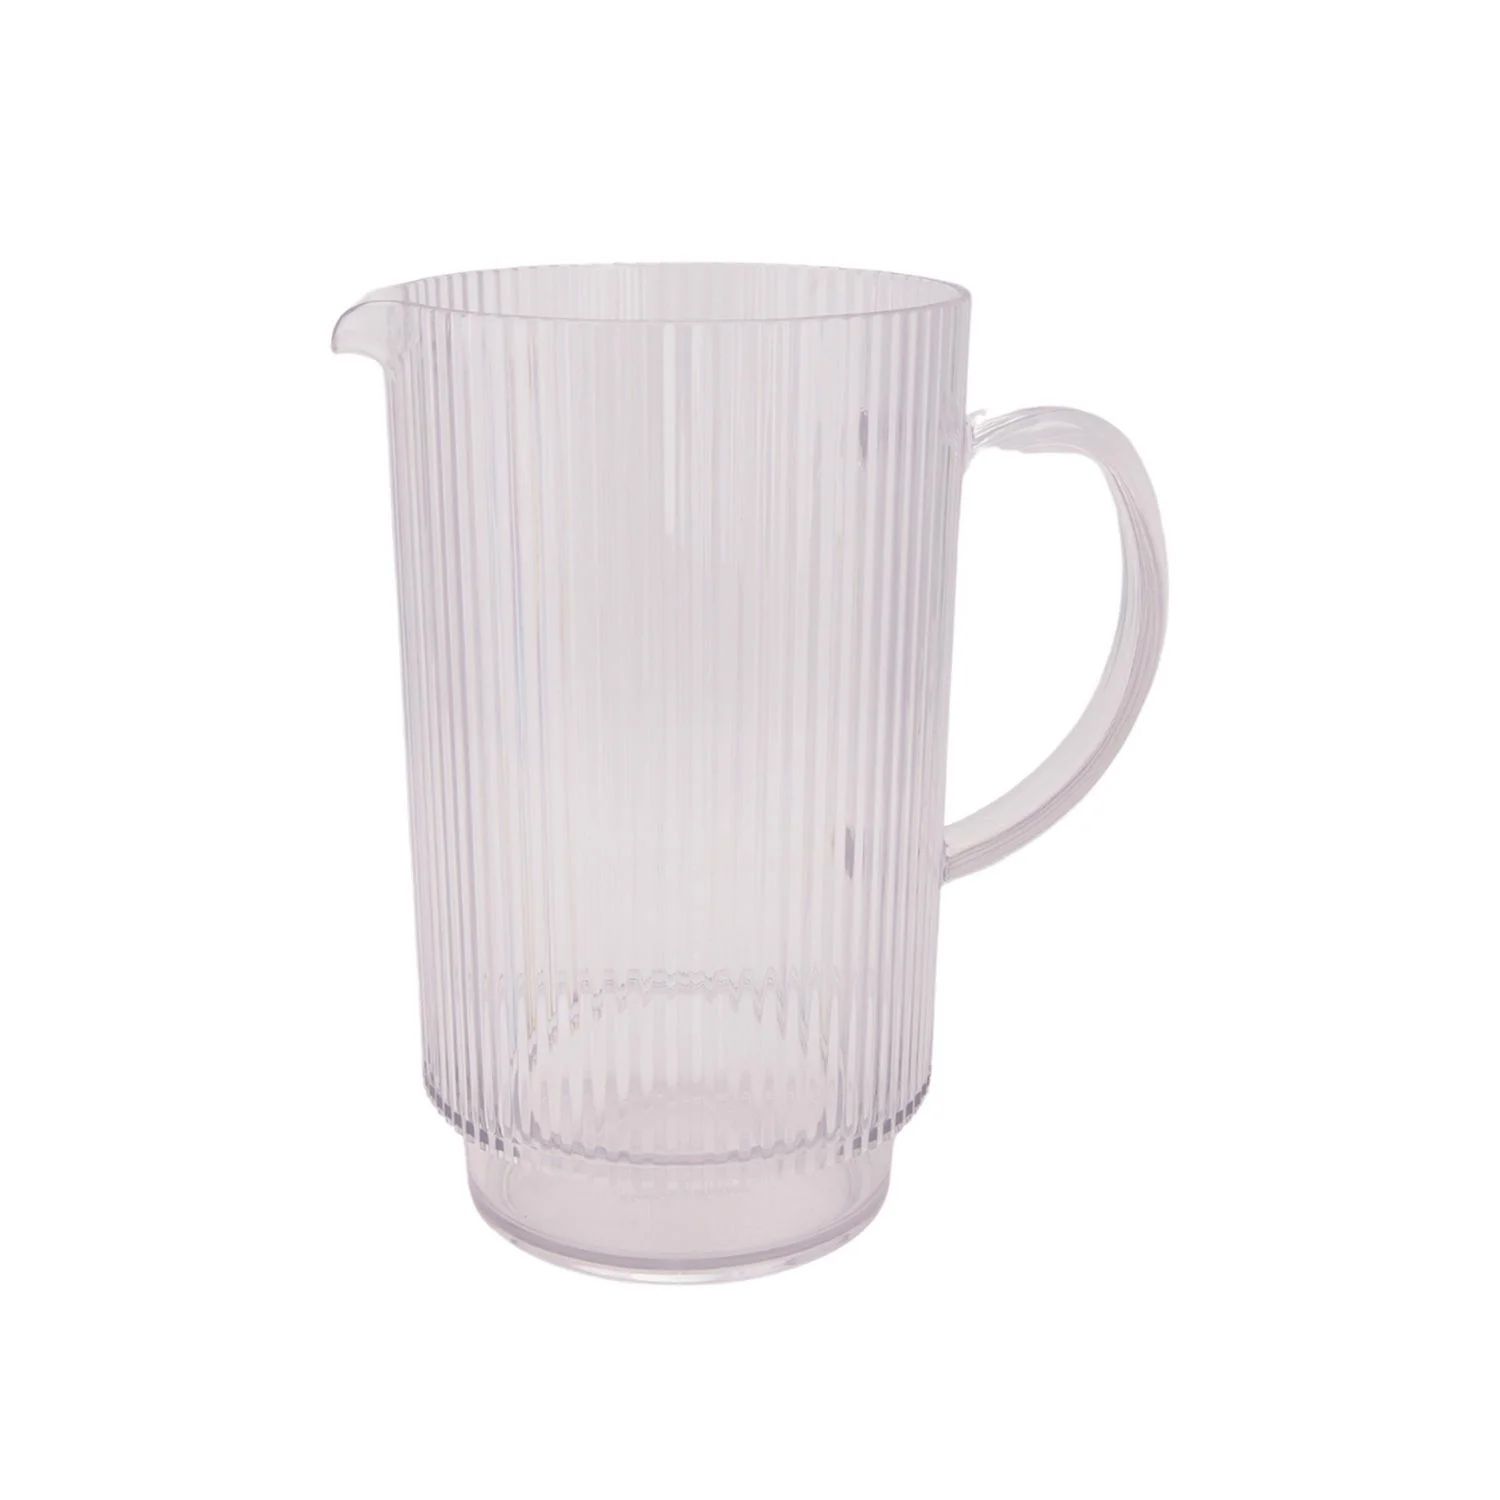 Hometrends Gray or Clear Ribbed Acrylic Pitcher 69.21oz 1pc, colors may vary | Walmart (CA)